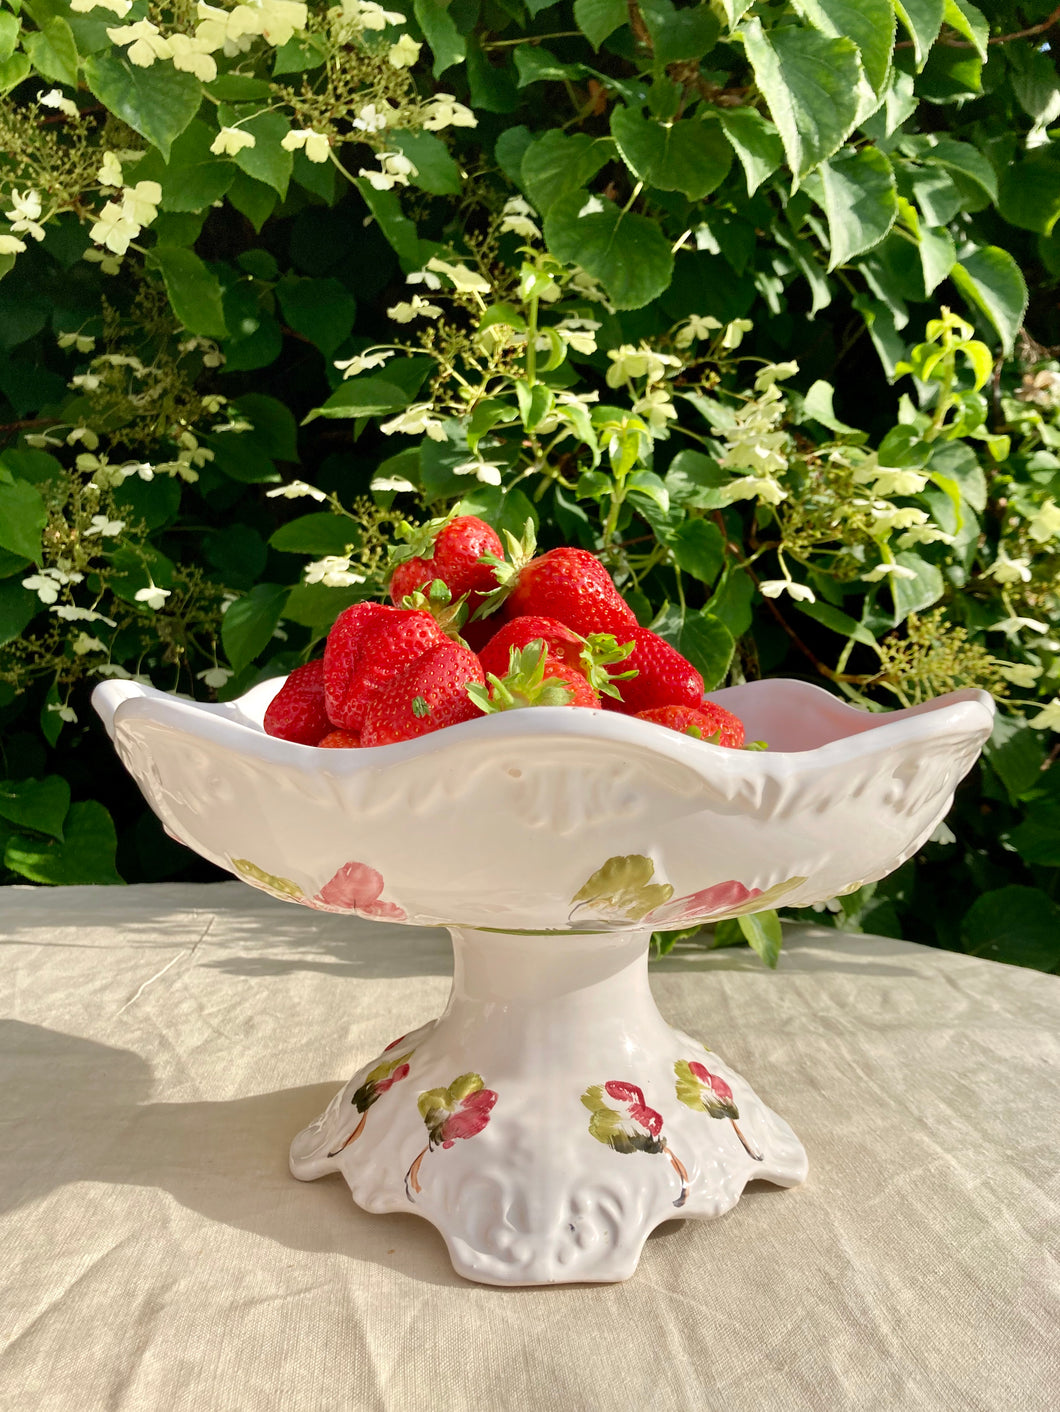 A large white and floral pedestal dish